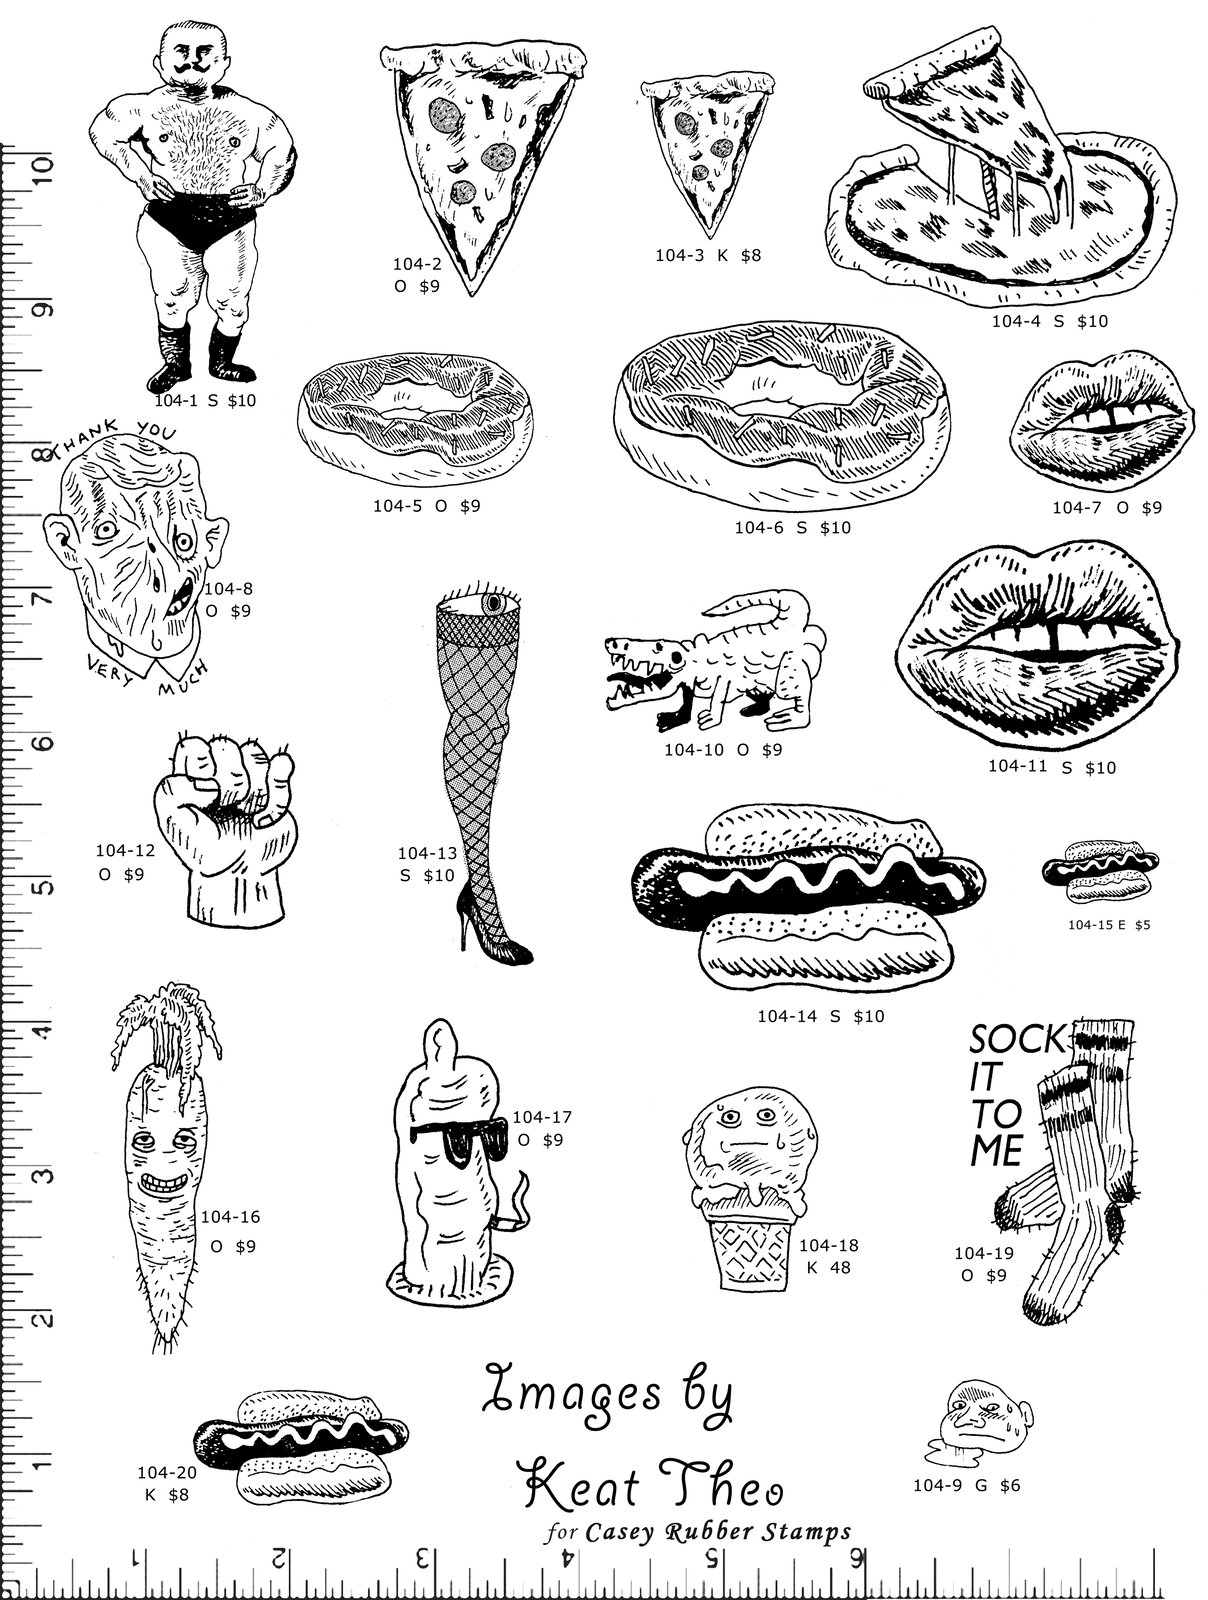 Goofy Food/Strong Man/Leg Rubber Stamps P104 | Casey Rubber Stamps